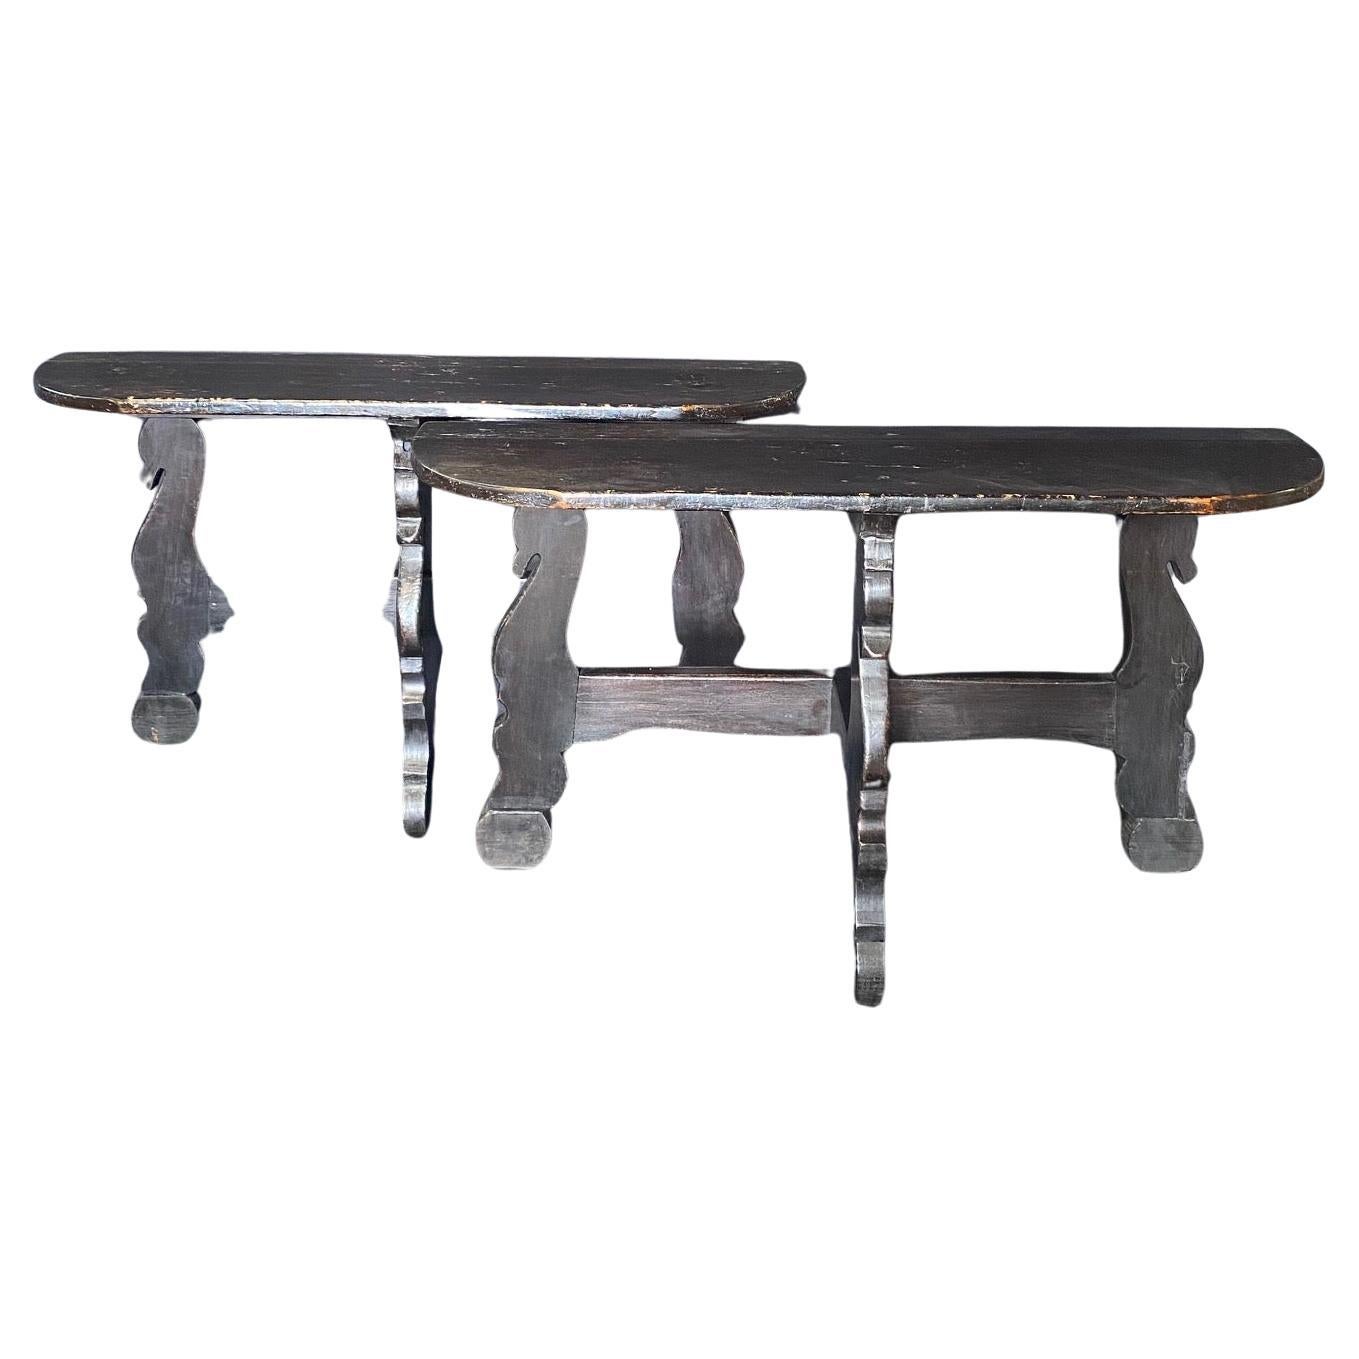  Pair of Antique Spanish Ebony Demilune Tables, Consoles or Side Tables